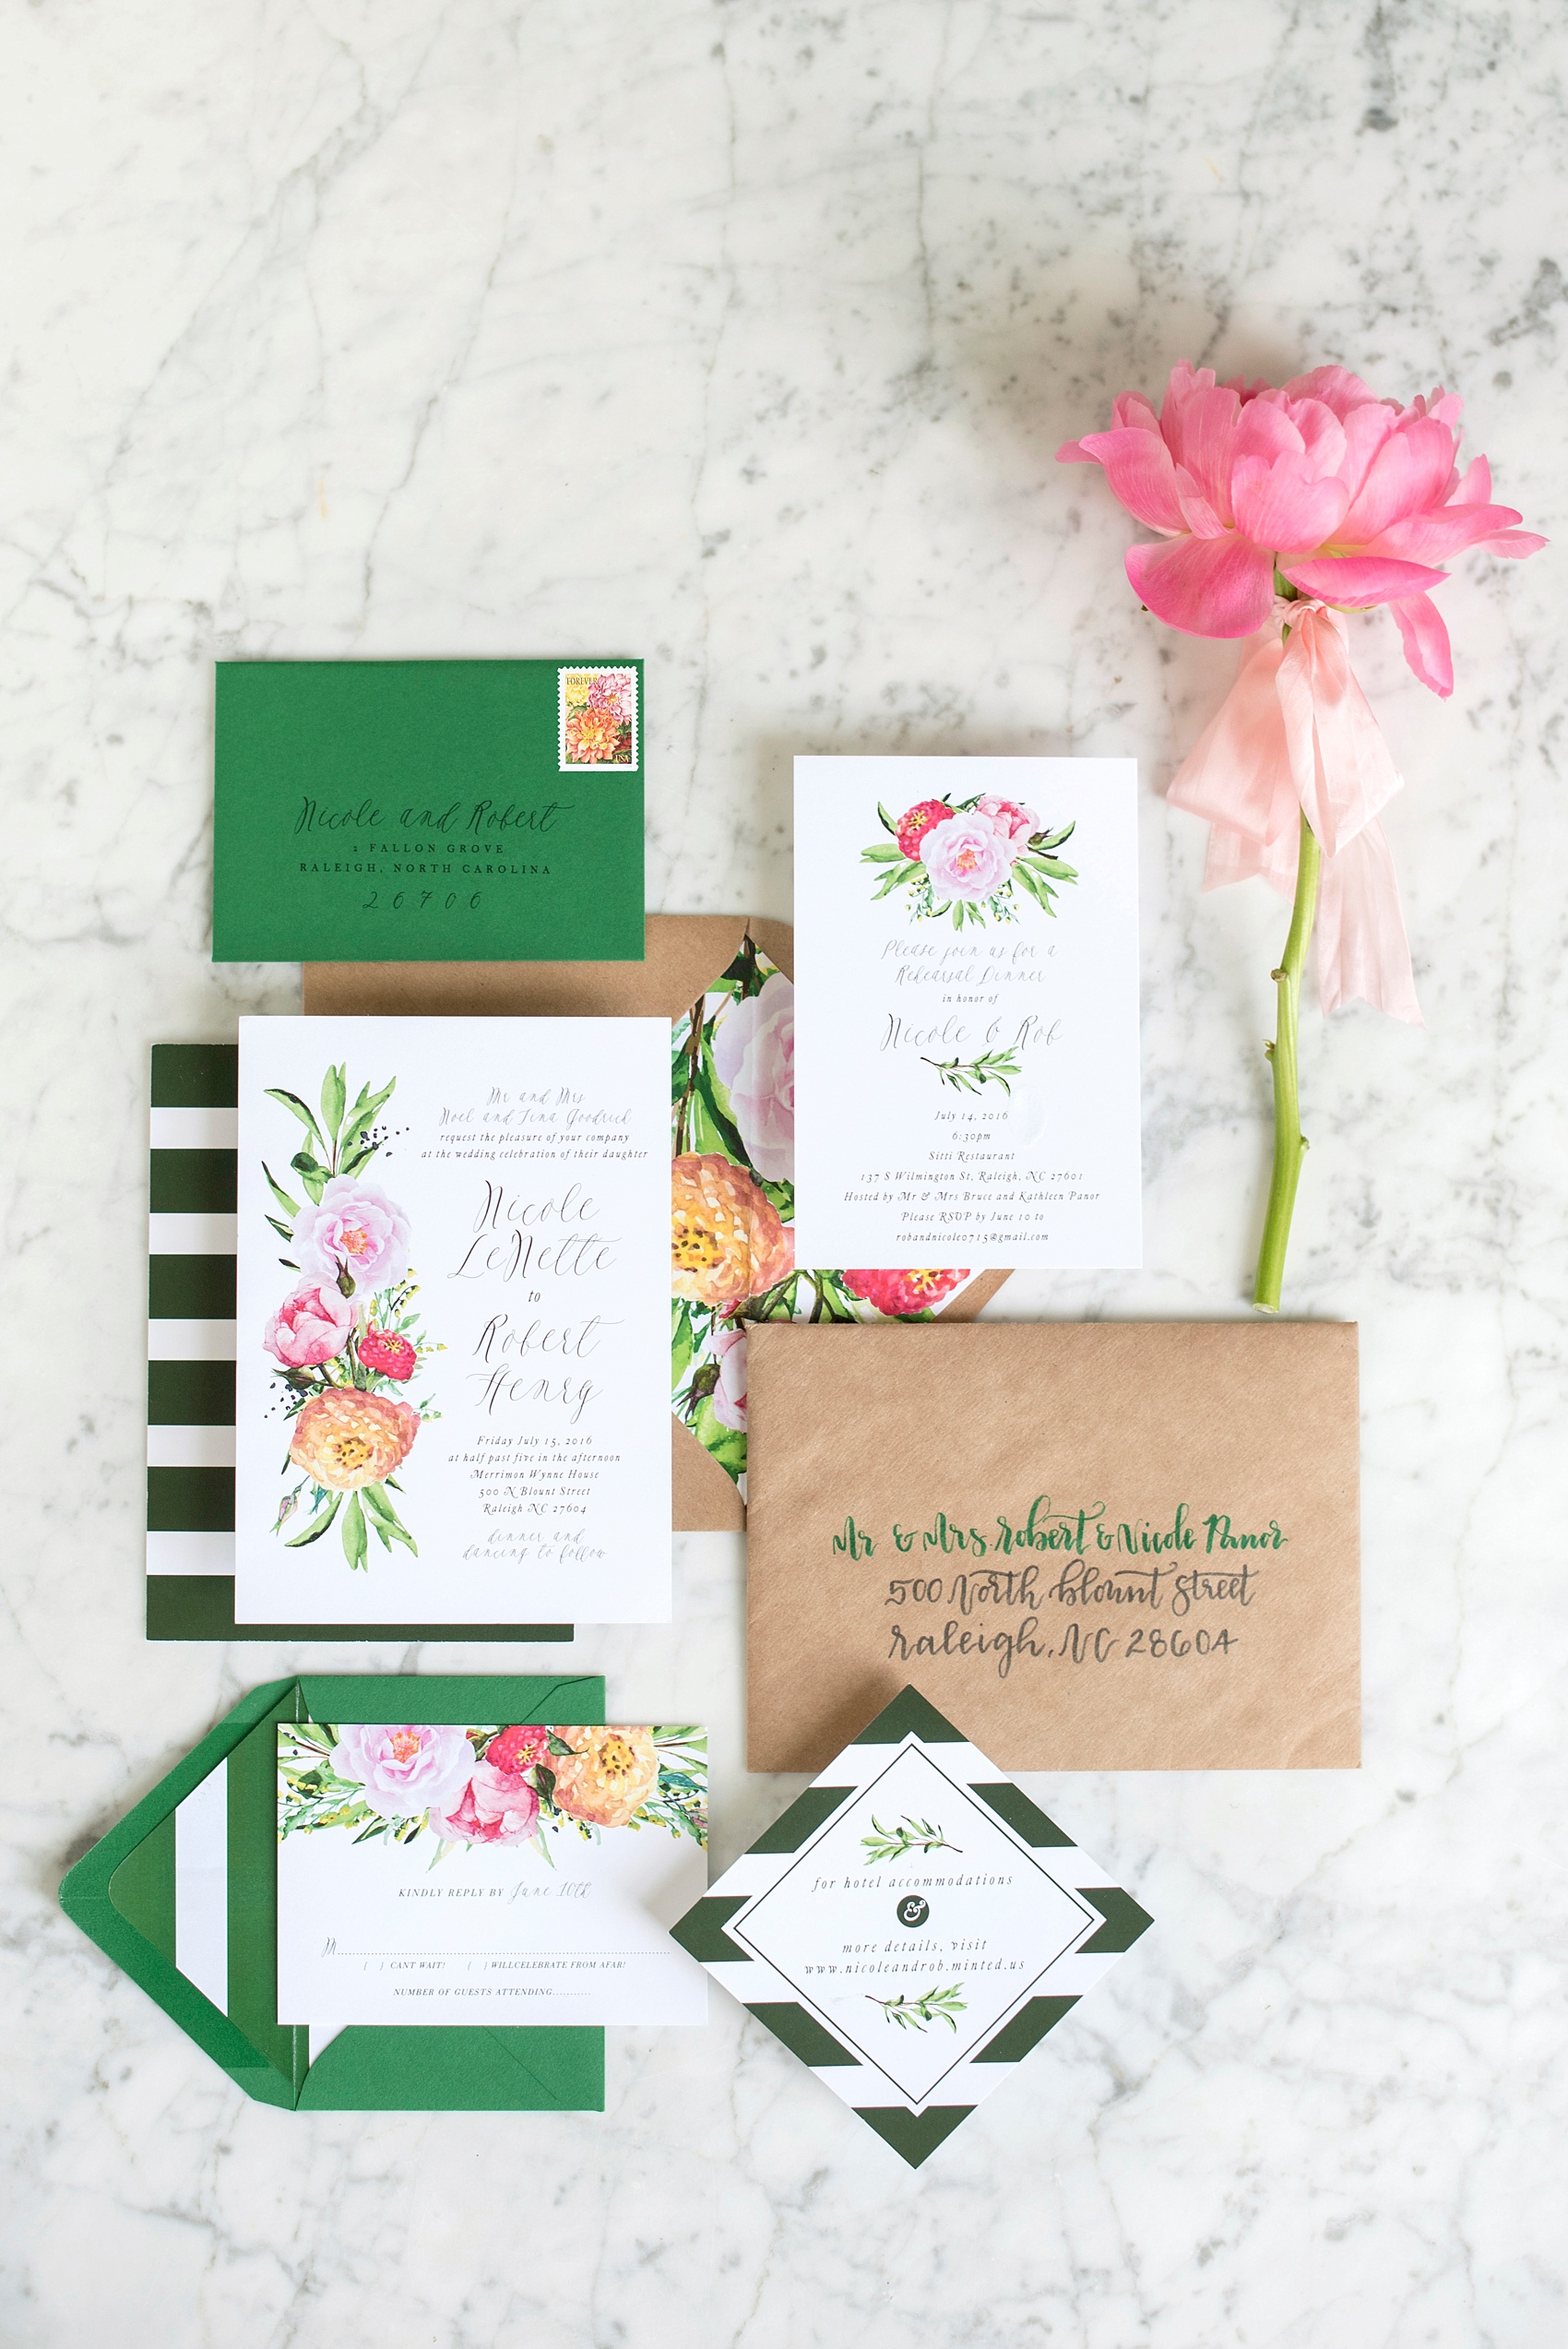 Mikkel Paige Photography wedding photos at The Merrimon-Wynne House in downtown Raleigh. Floral stationery suite set with stripes and vibrant colors. Kraft paper envelope with two-toned calligraphy.